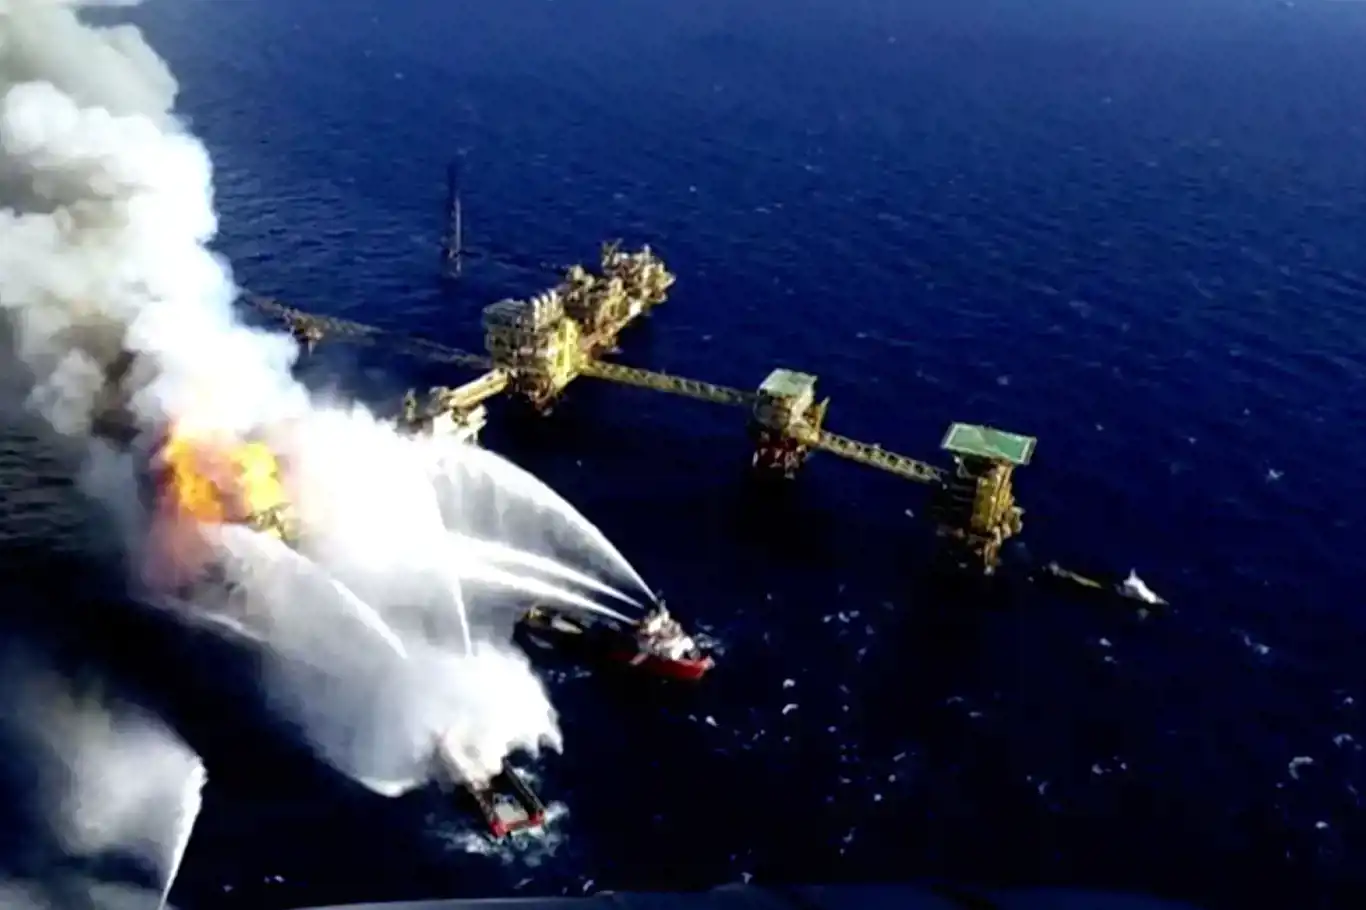 Fire at Pemex oil platform in Mexico claims 2 lives, injures 6